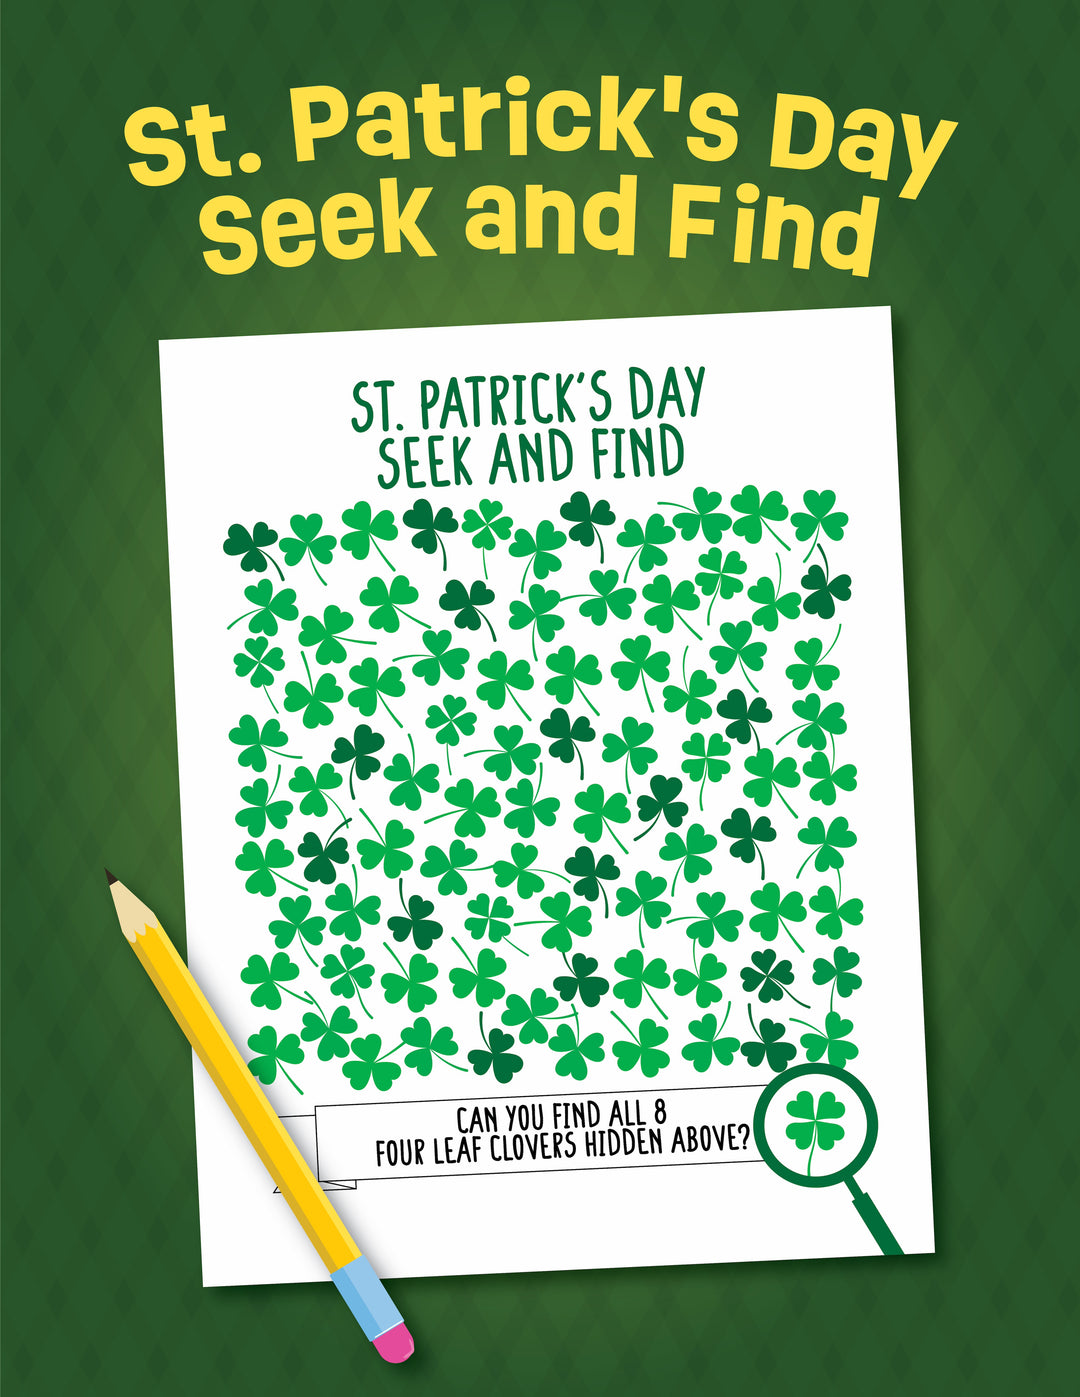 St. Patrick's Day Seek-and-Find